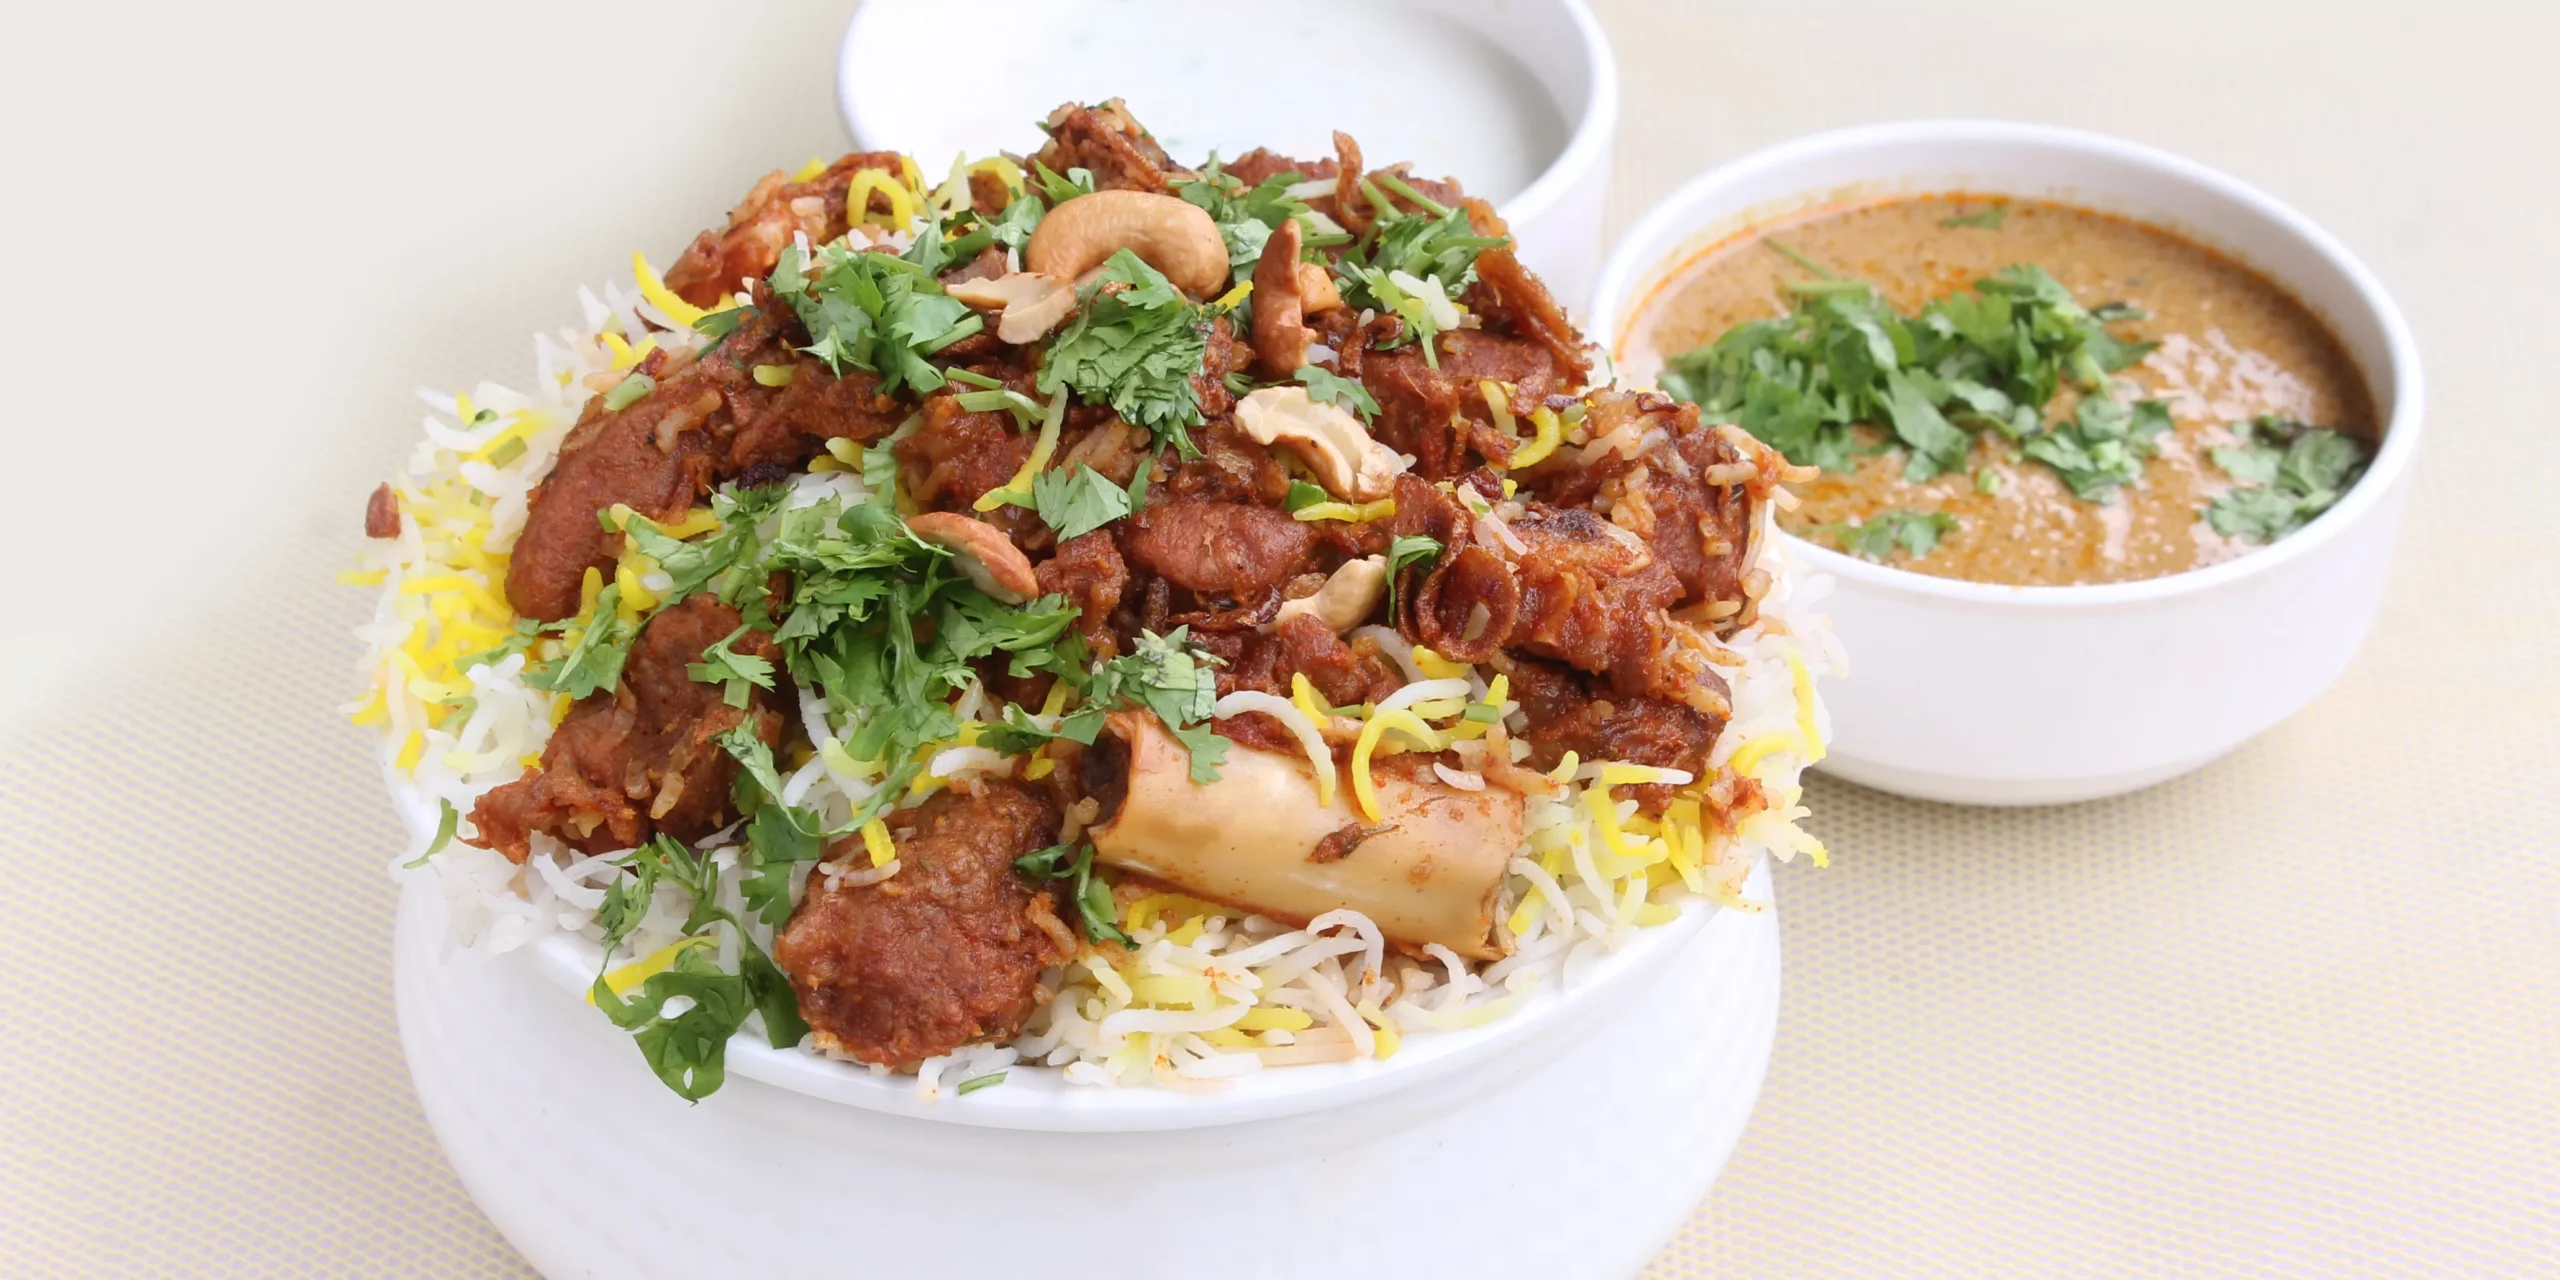 Shah Ghouse Hotel: A Royal Feast of Authentic Hyderabadi